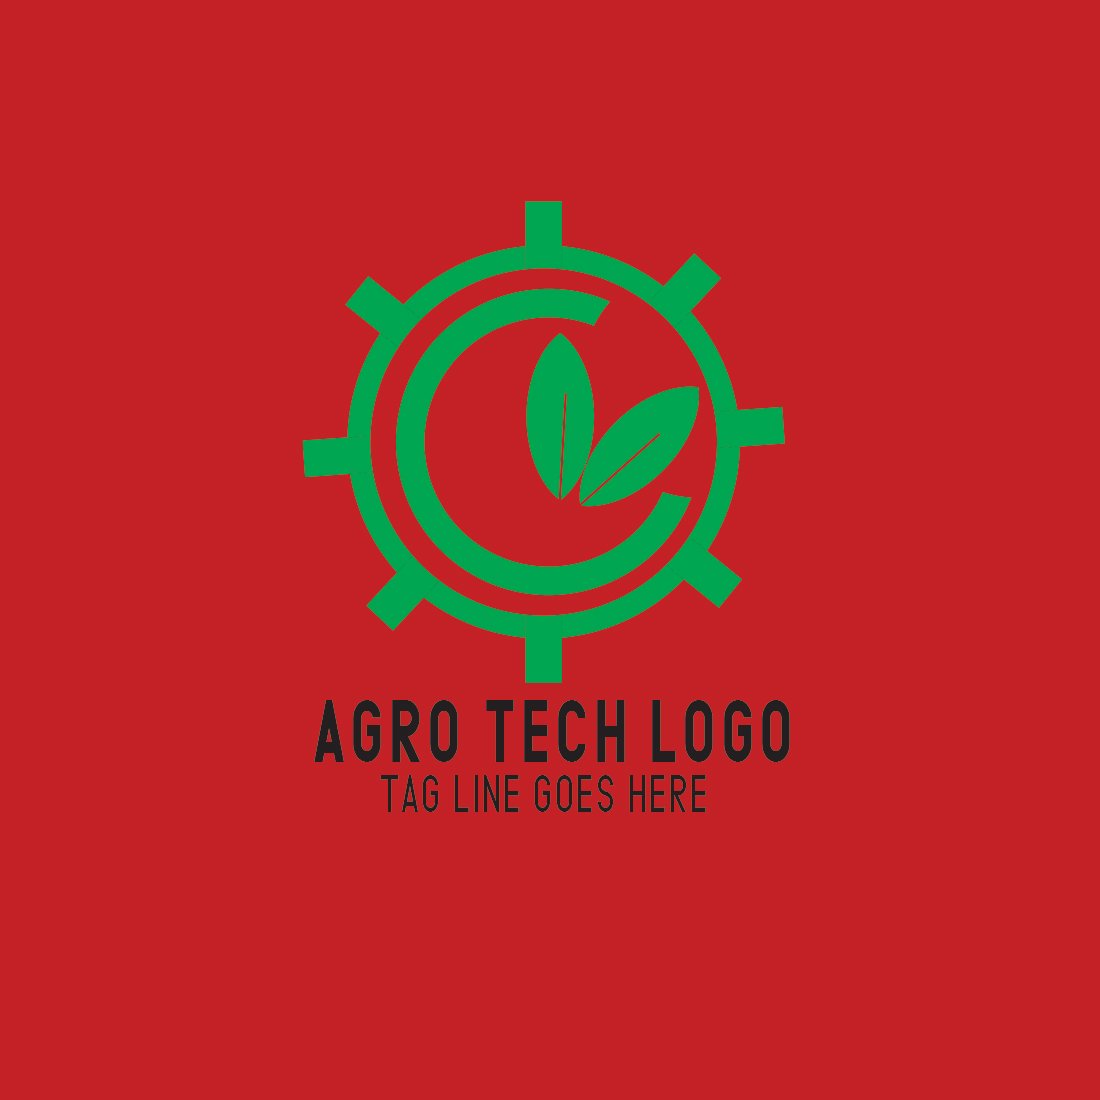 THREE AGRICULTURE LOGOS AND AGGROTECH LOGOS preview image.